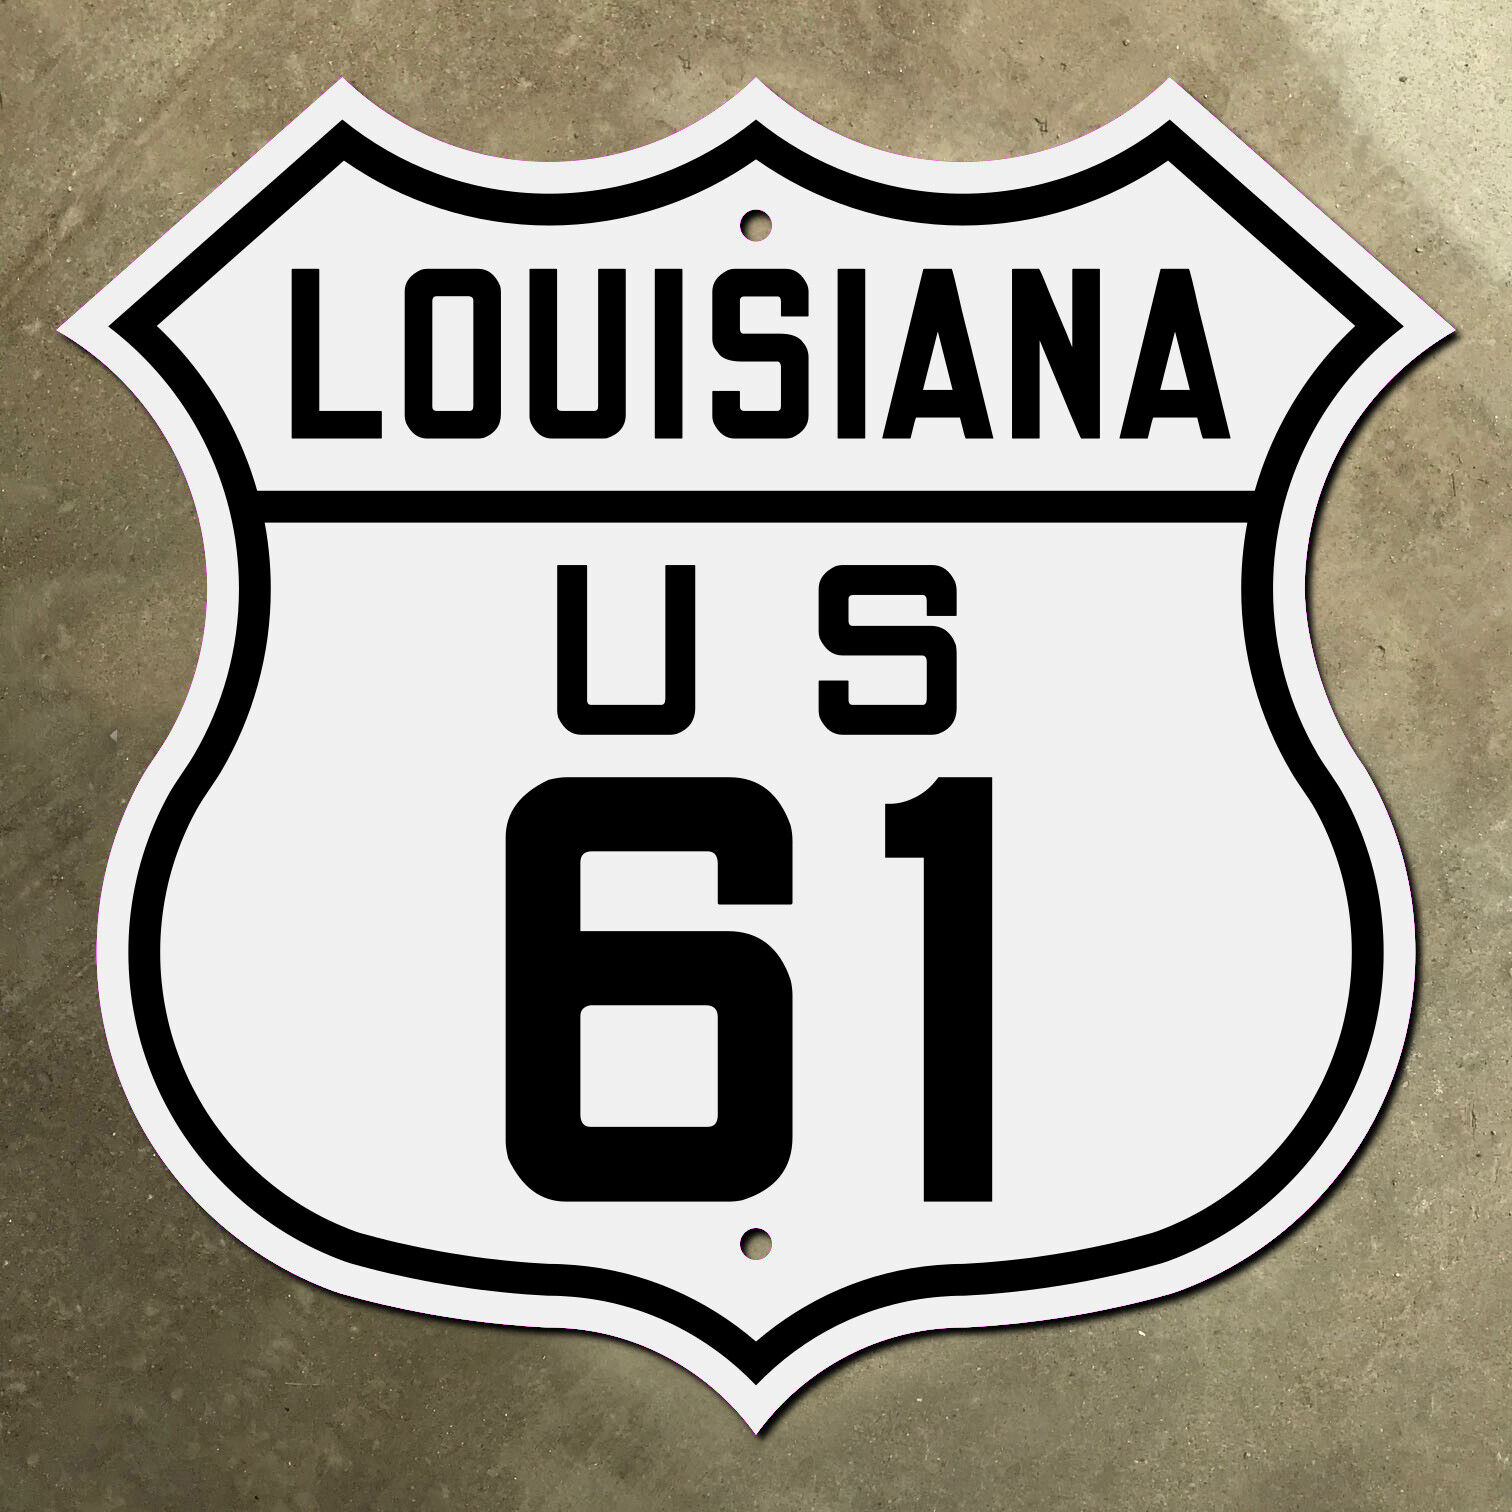 Louisiana US route 61 highway marker road sign shield 1926 New Orleans blues 16